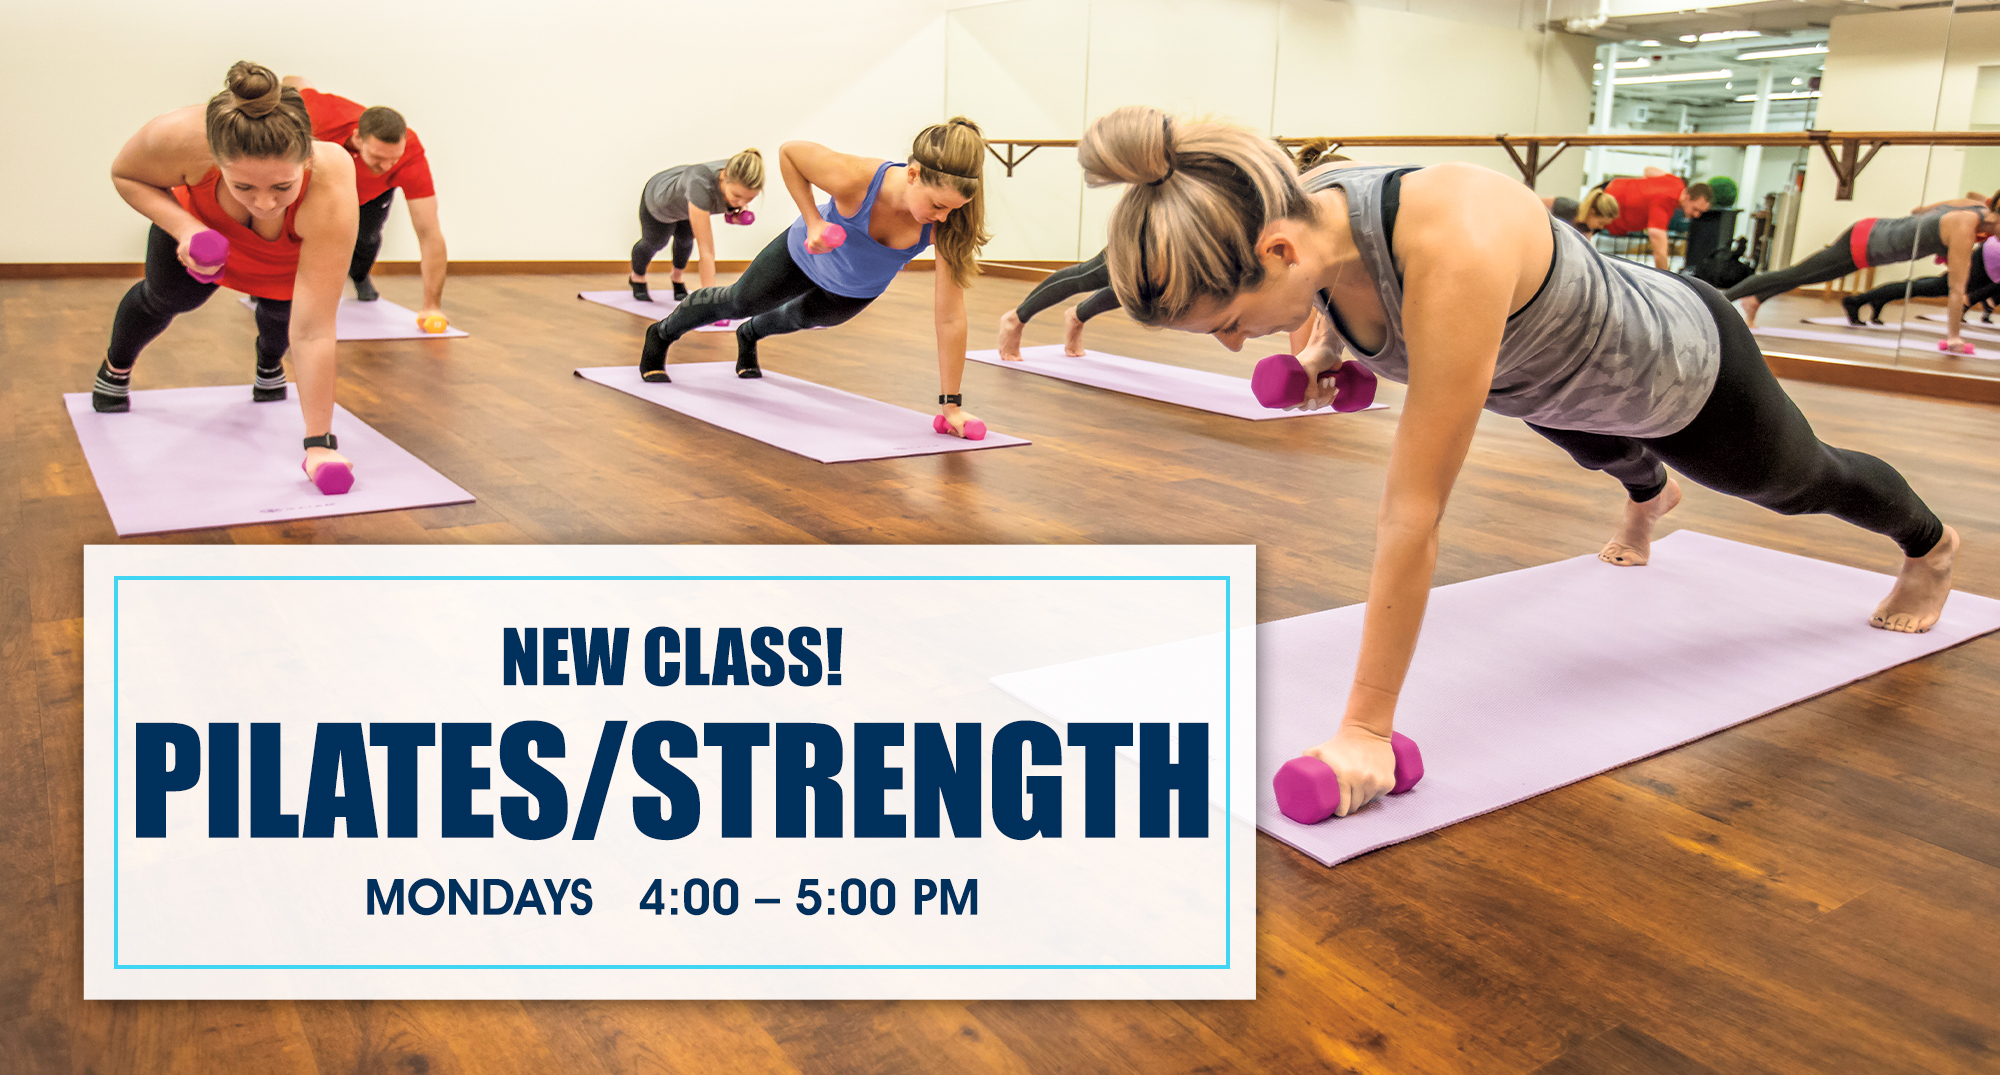 Pilates/Strength– Combines traditional yoga poses with strength training.